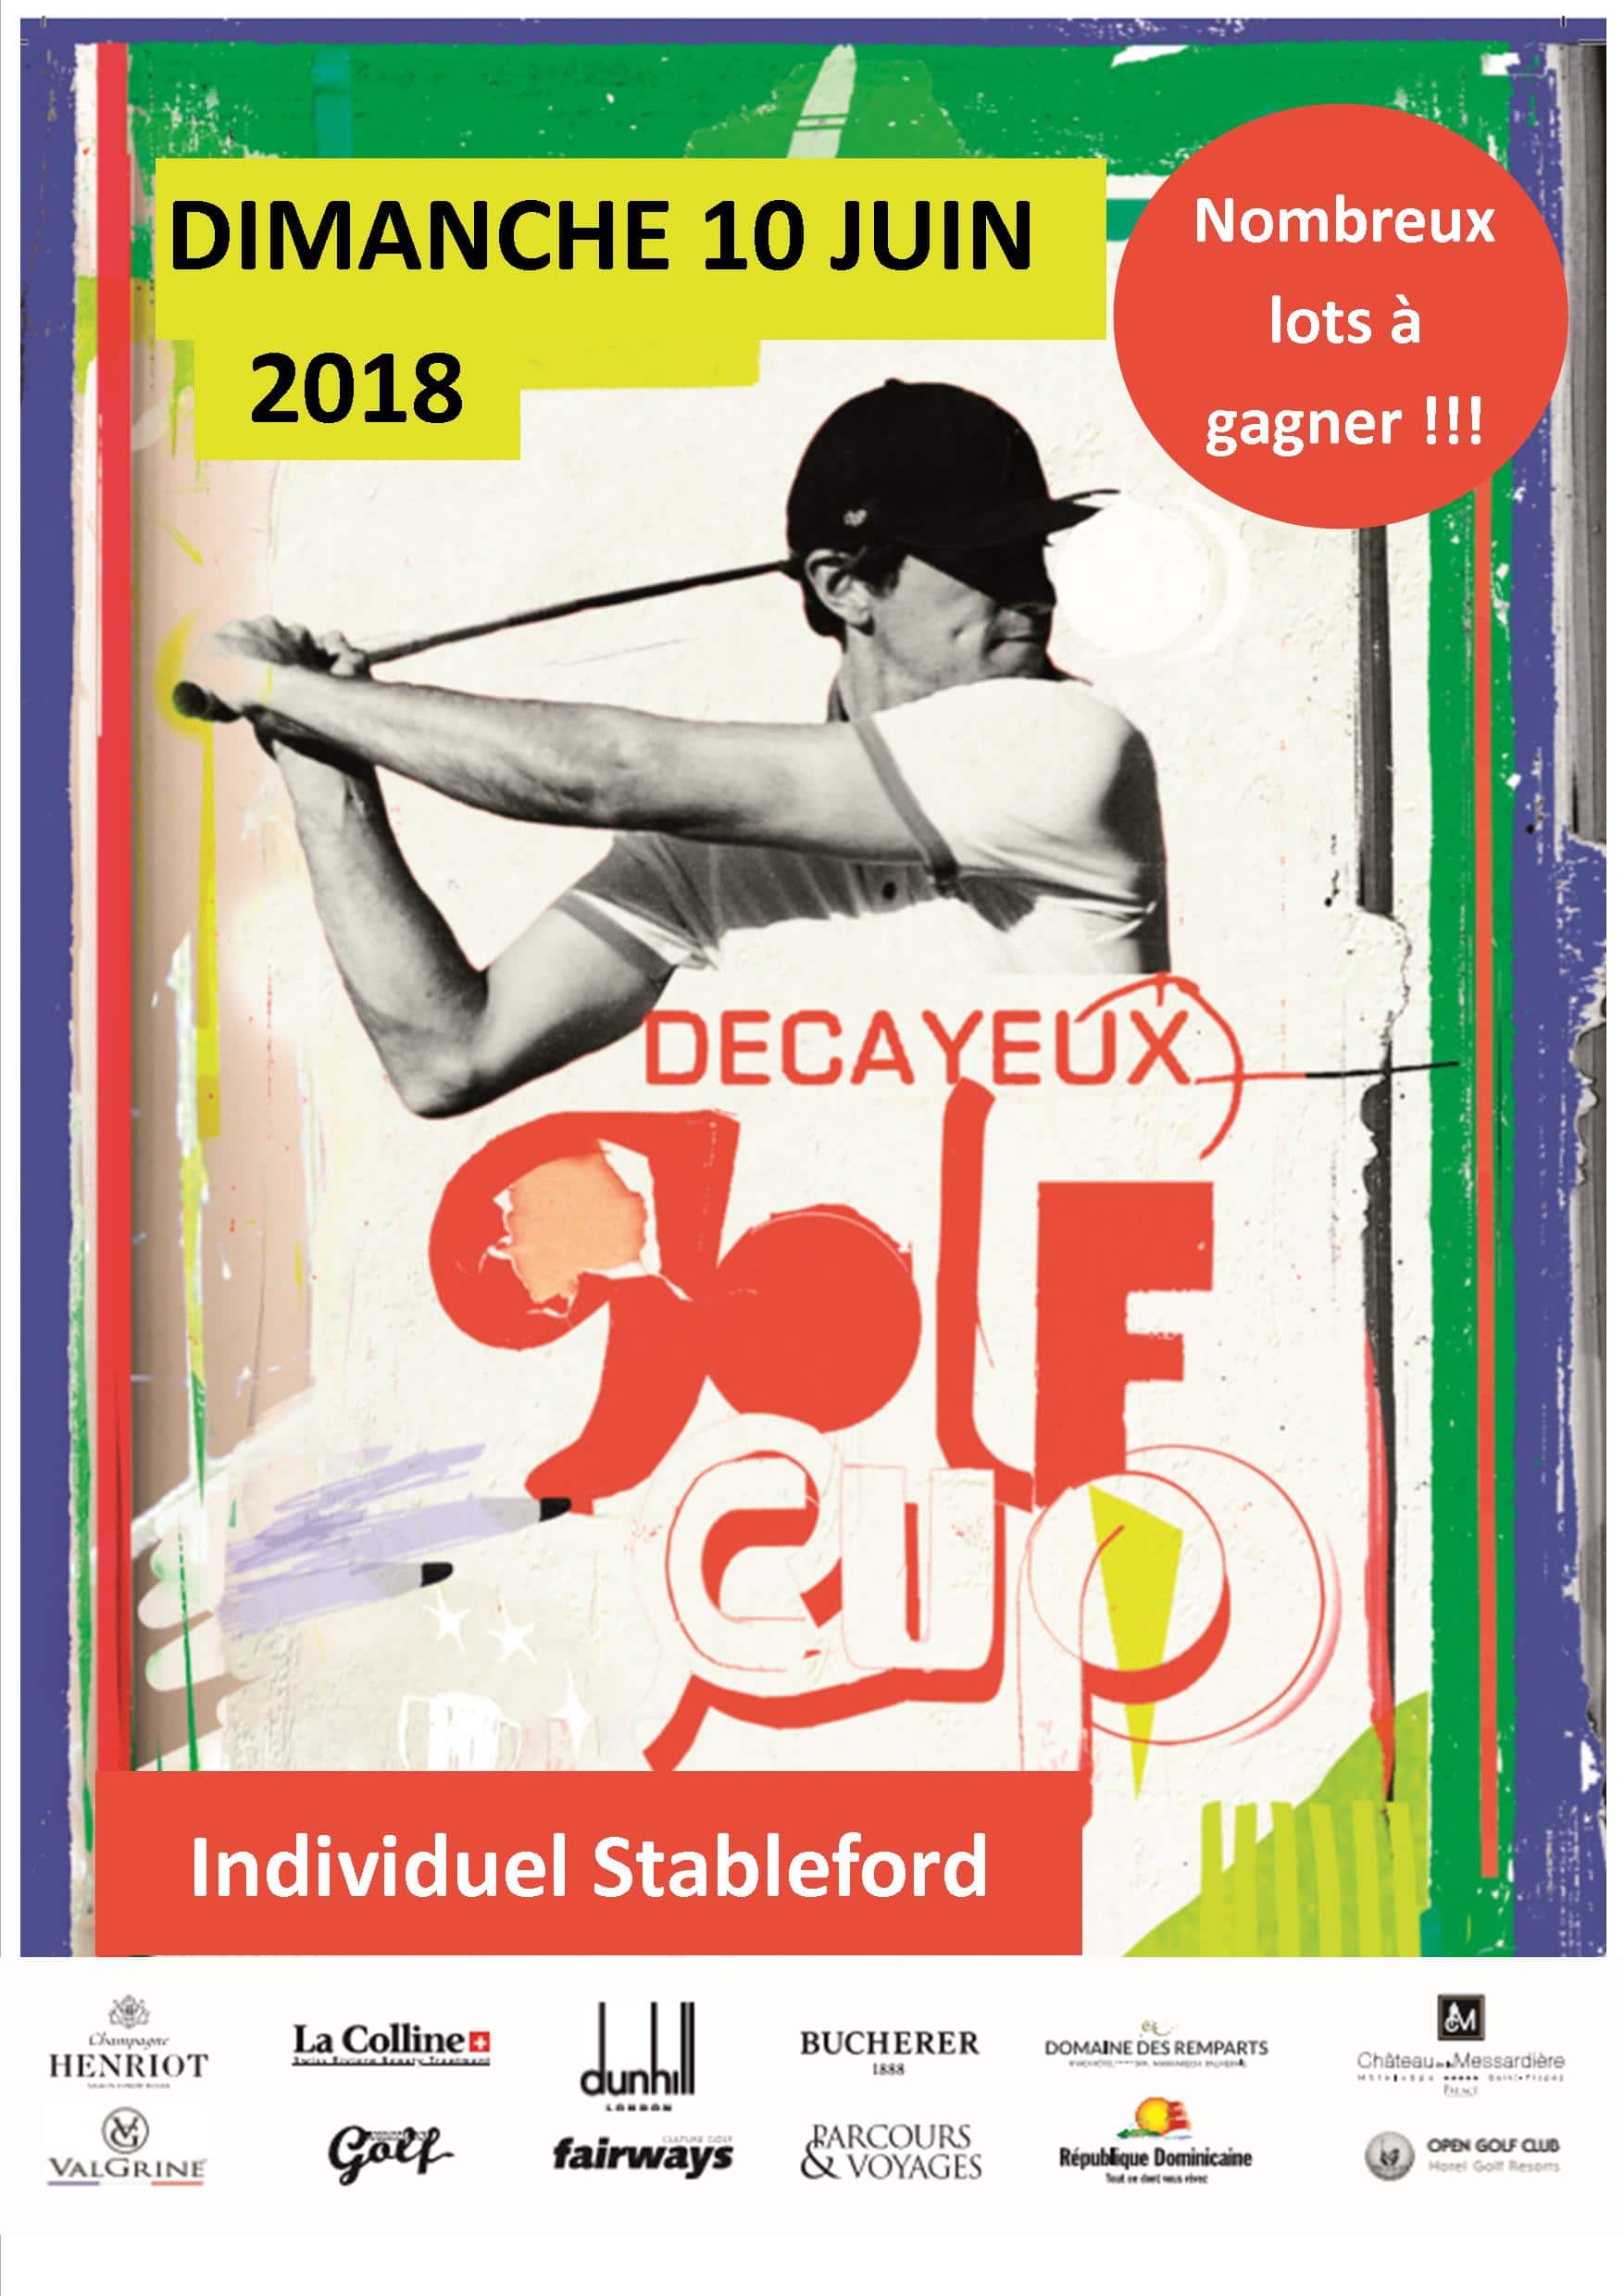 2018-06-10 - DECAYEUX GOLF CUP 2018